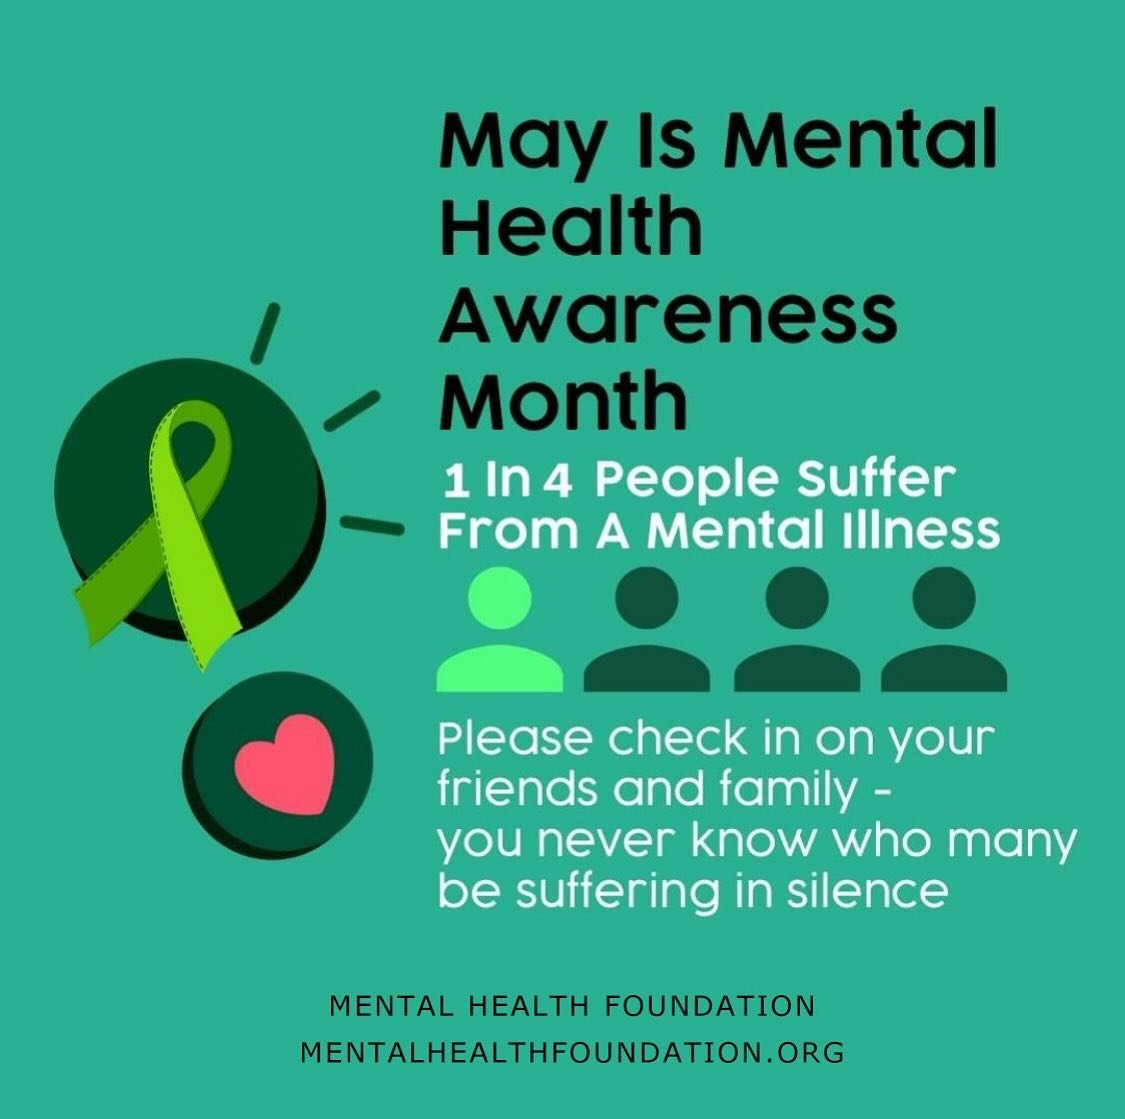 May is Mental Health Awareness Month. Check in on your friends and loved ones. Be kind. #breakthestigma💚